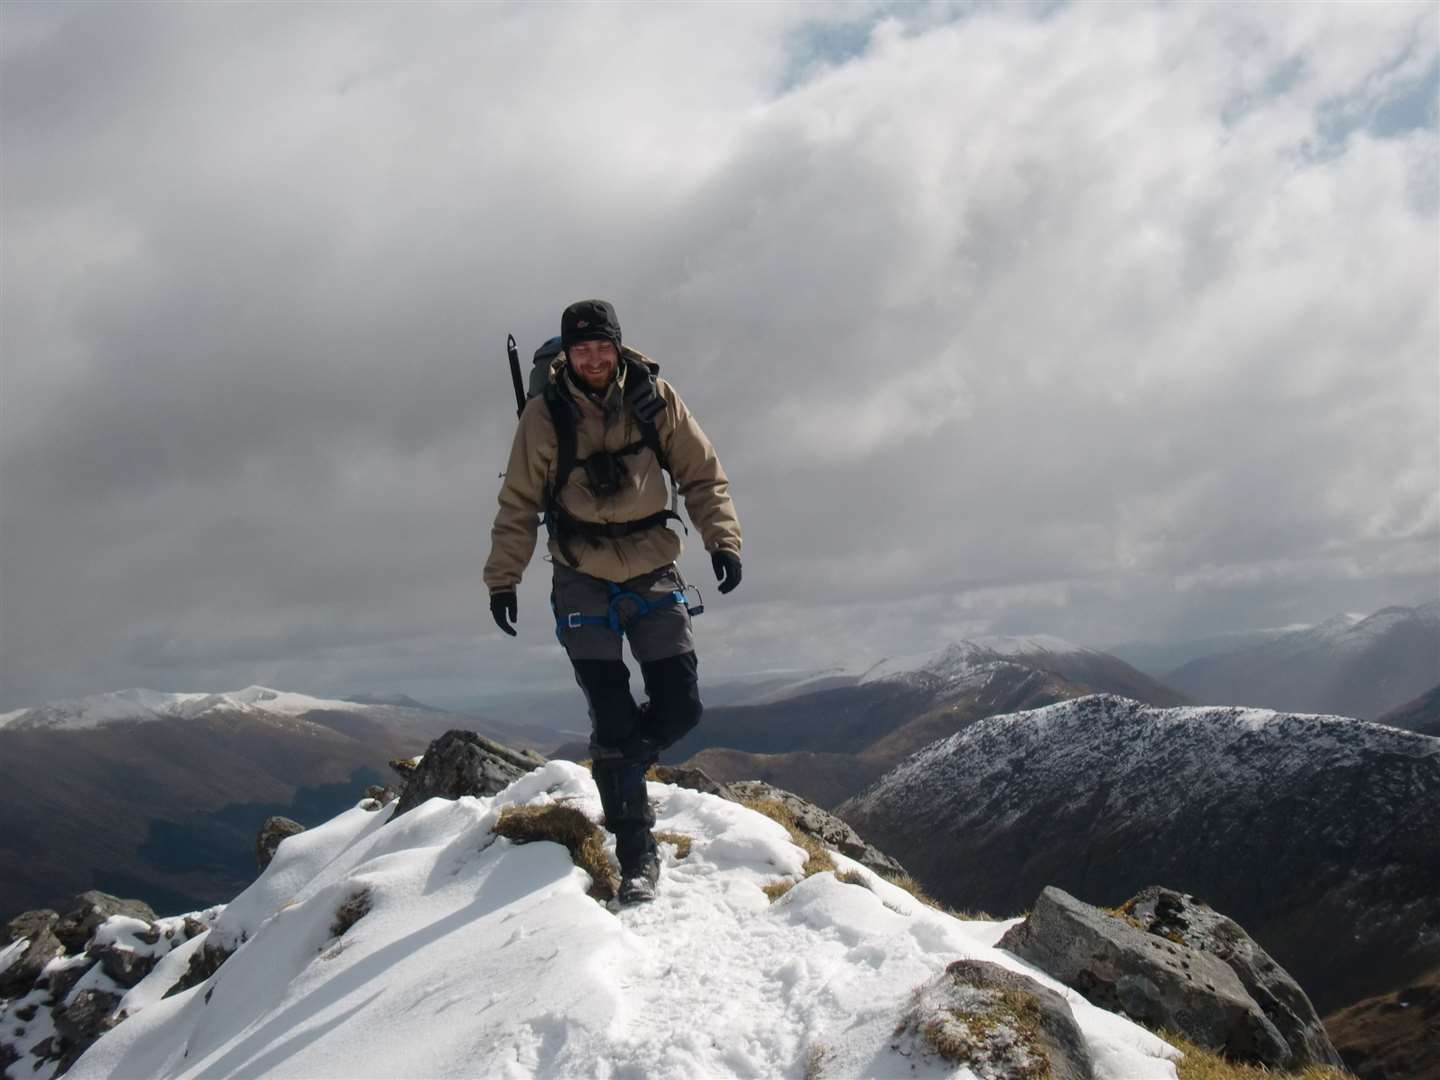 John crosses a snowy patch on the upper part of the Forcan Ridge.